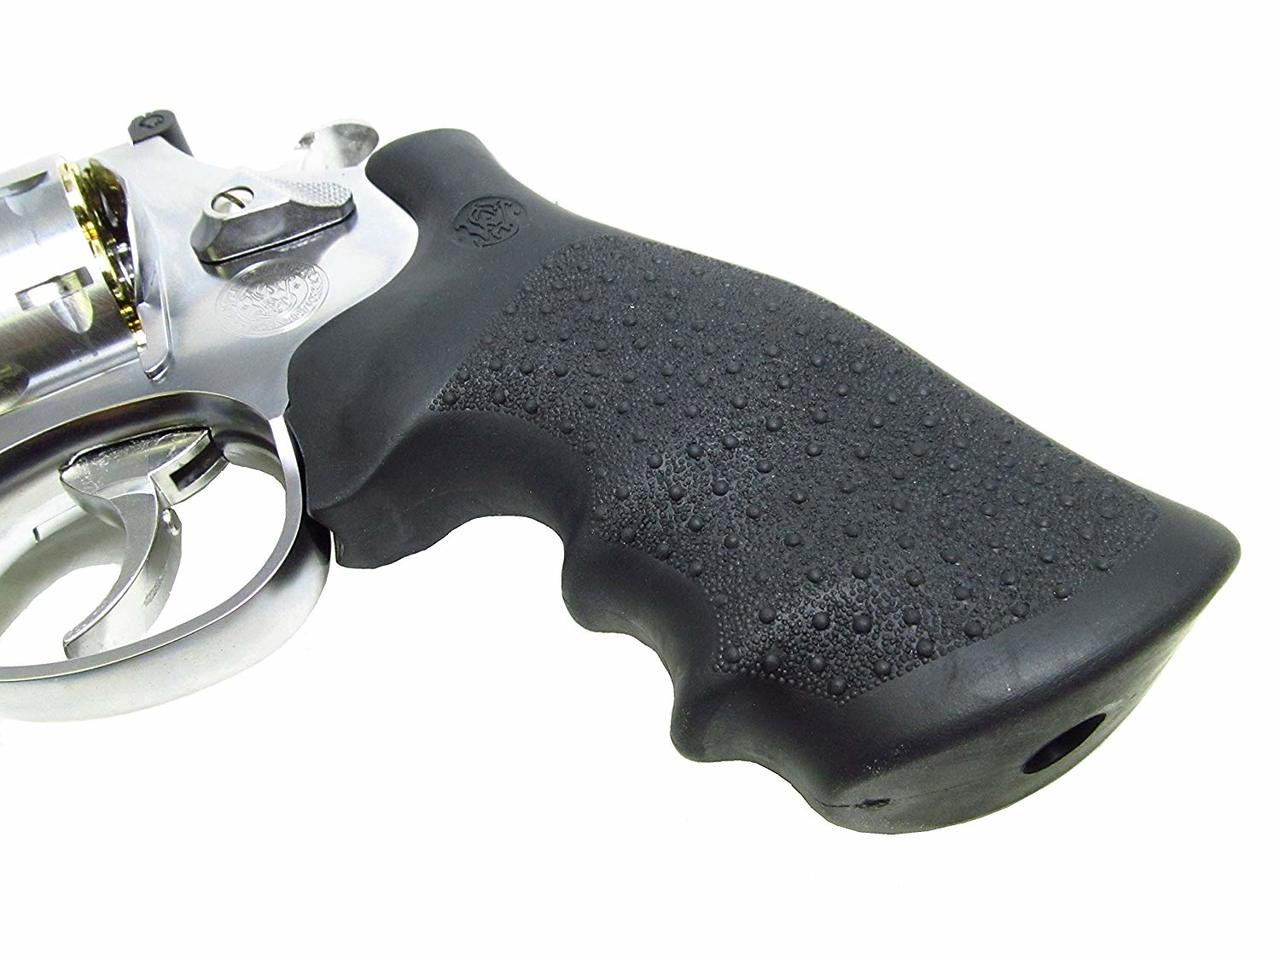 Trigger of Tanaka S&W M627 5 inch Eight Shot Stainless Steel Finish Version 2 Gas Revolver Airsoft Gun